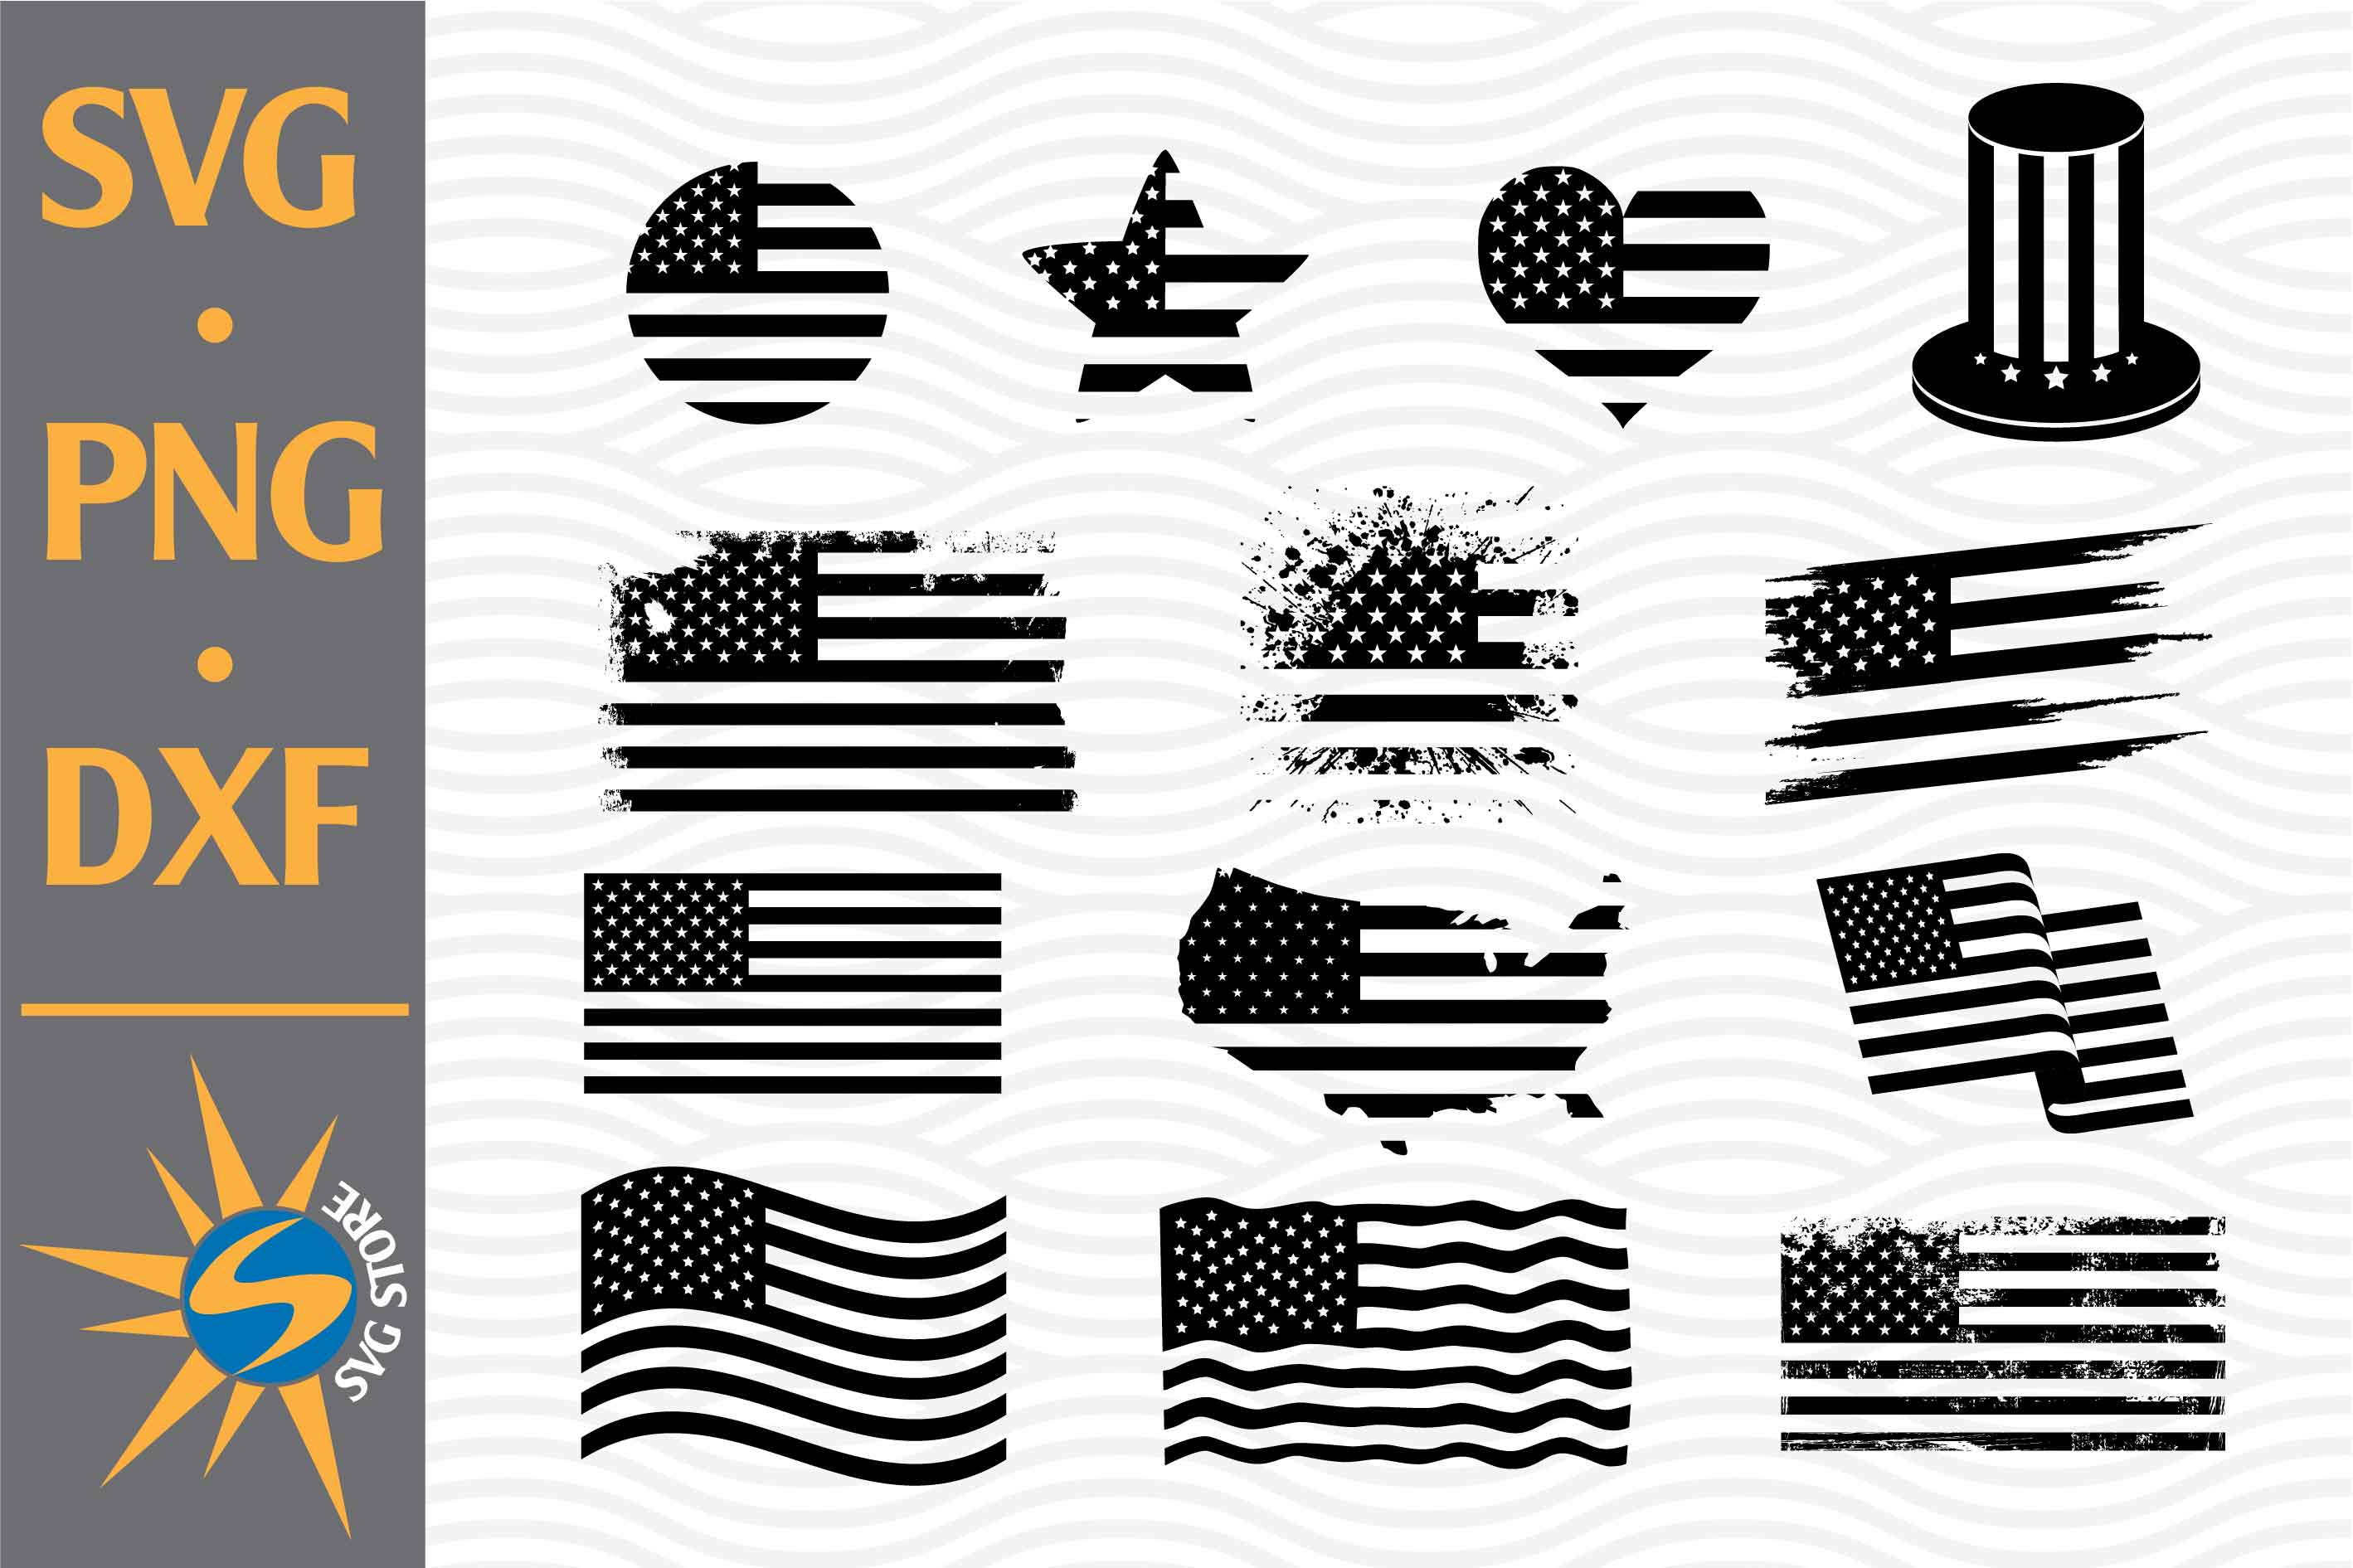 American Flag Silhouette SVG, PNG, DXF Digital Files Include - So Fontsy